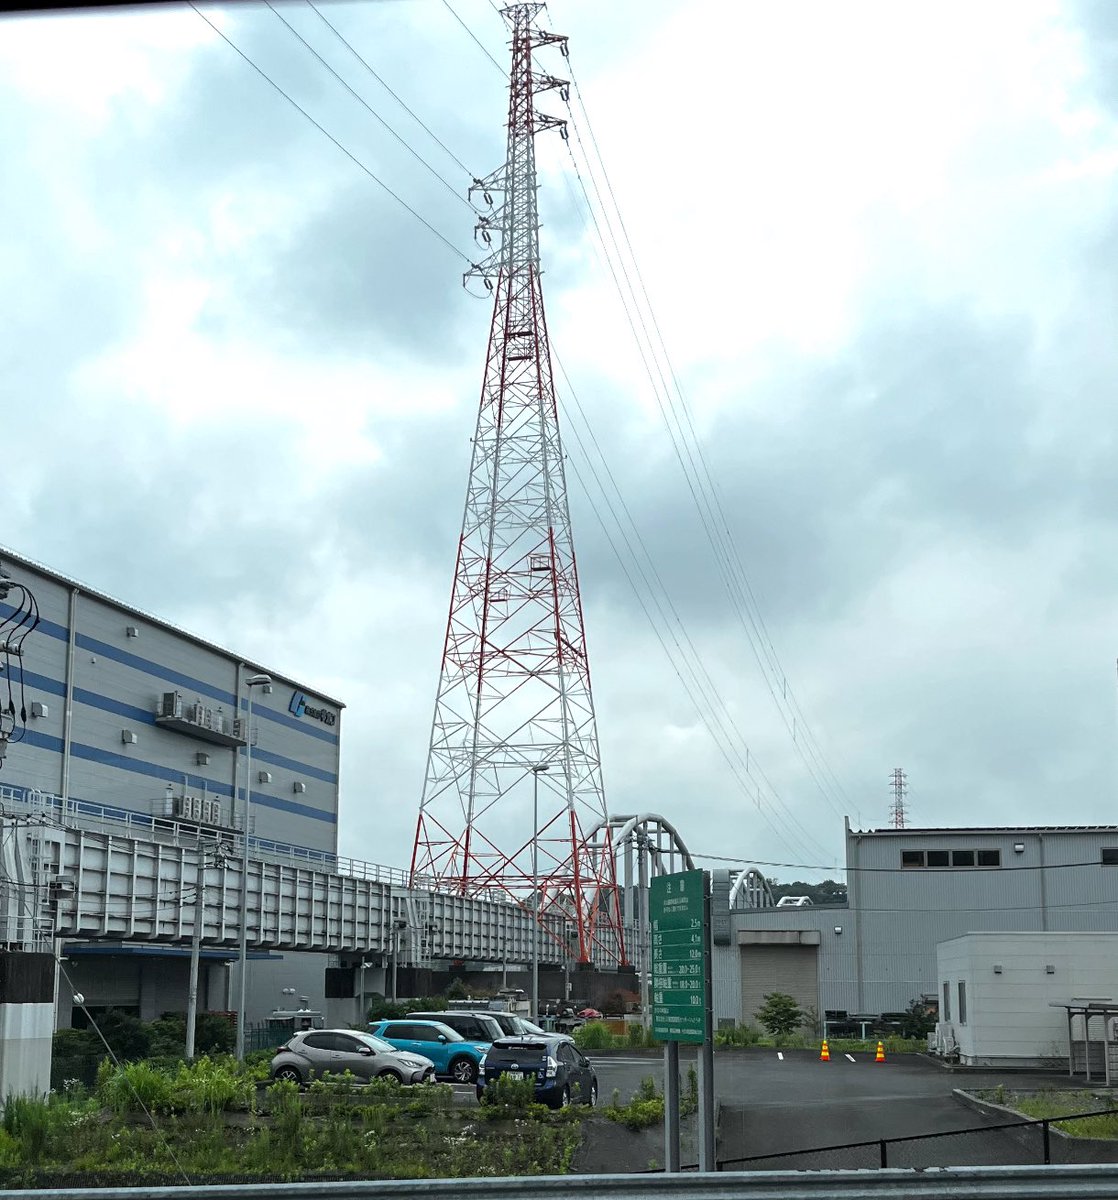 When there are constraints, the highway goes through the building and the railway goes between the transmission tower.
#Japan 
#EngineeringSolutions